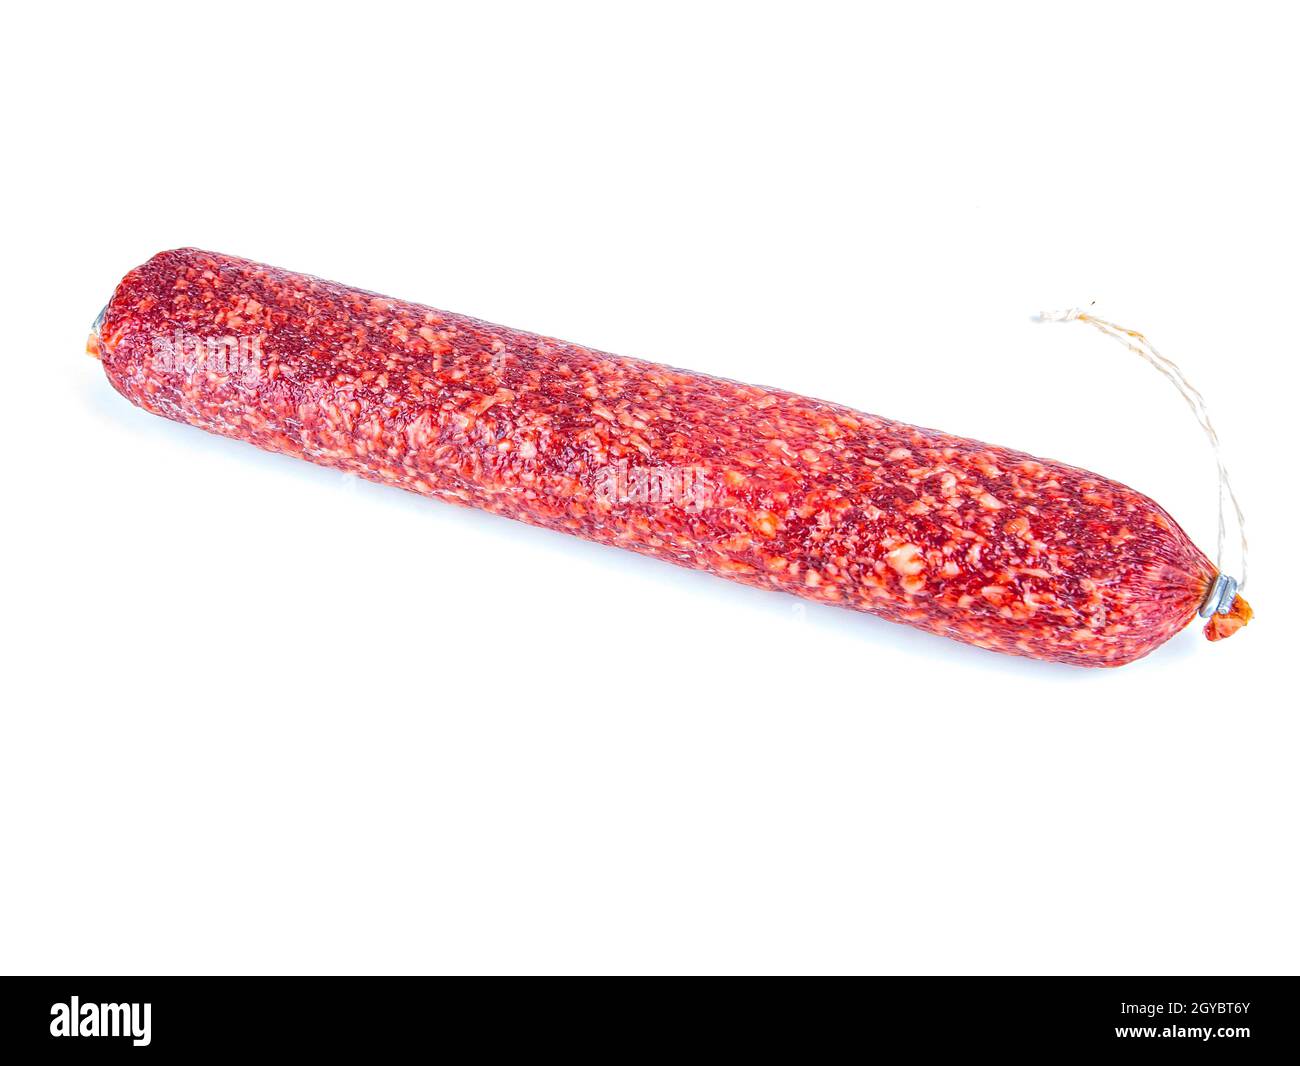 Meat product sausage on a white background. Pork sausage. Beef meat. Home kitchen. Fatty food. Unhealthy food. Calories. Showcase of a butcher's shop. Stock Photo